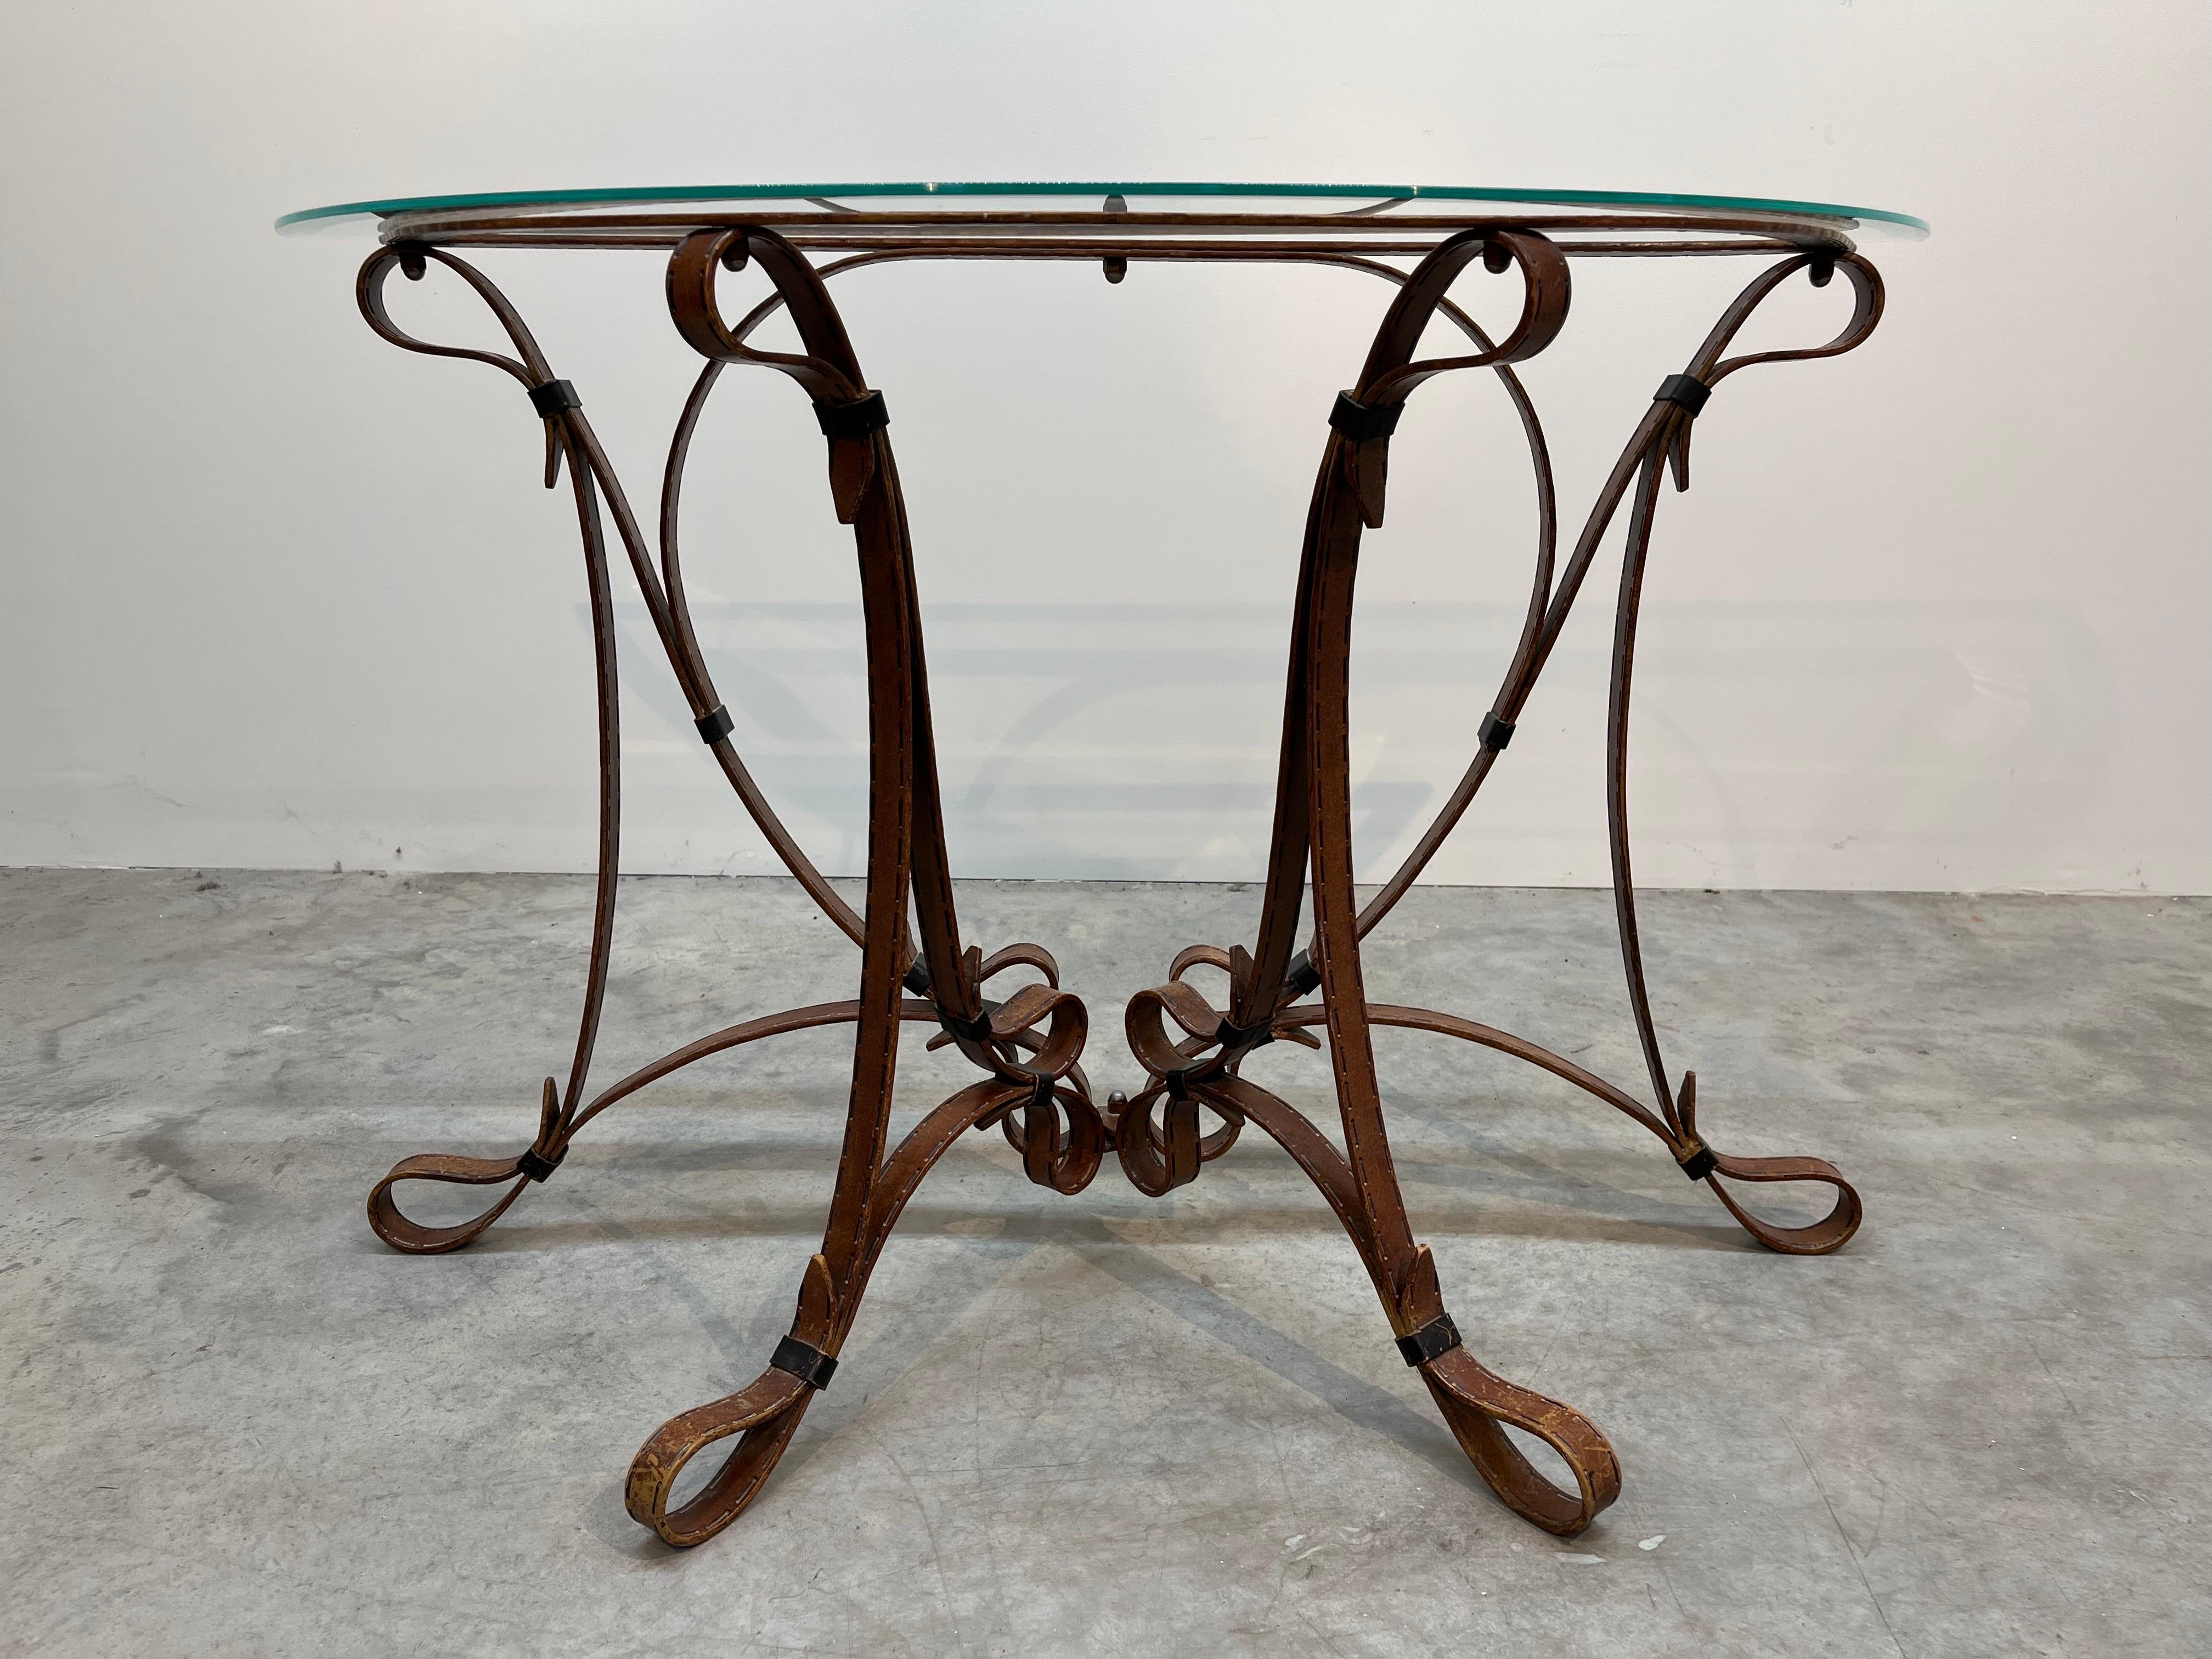 A beautiful Demi-Lune console table attributed to Jacques Adnet having faux leather strap scrolled iron frame with beveled glass top circa 1970. Solid iron construction with sturdy frame and wonderful details.